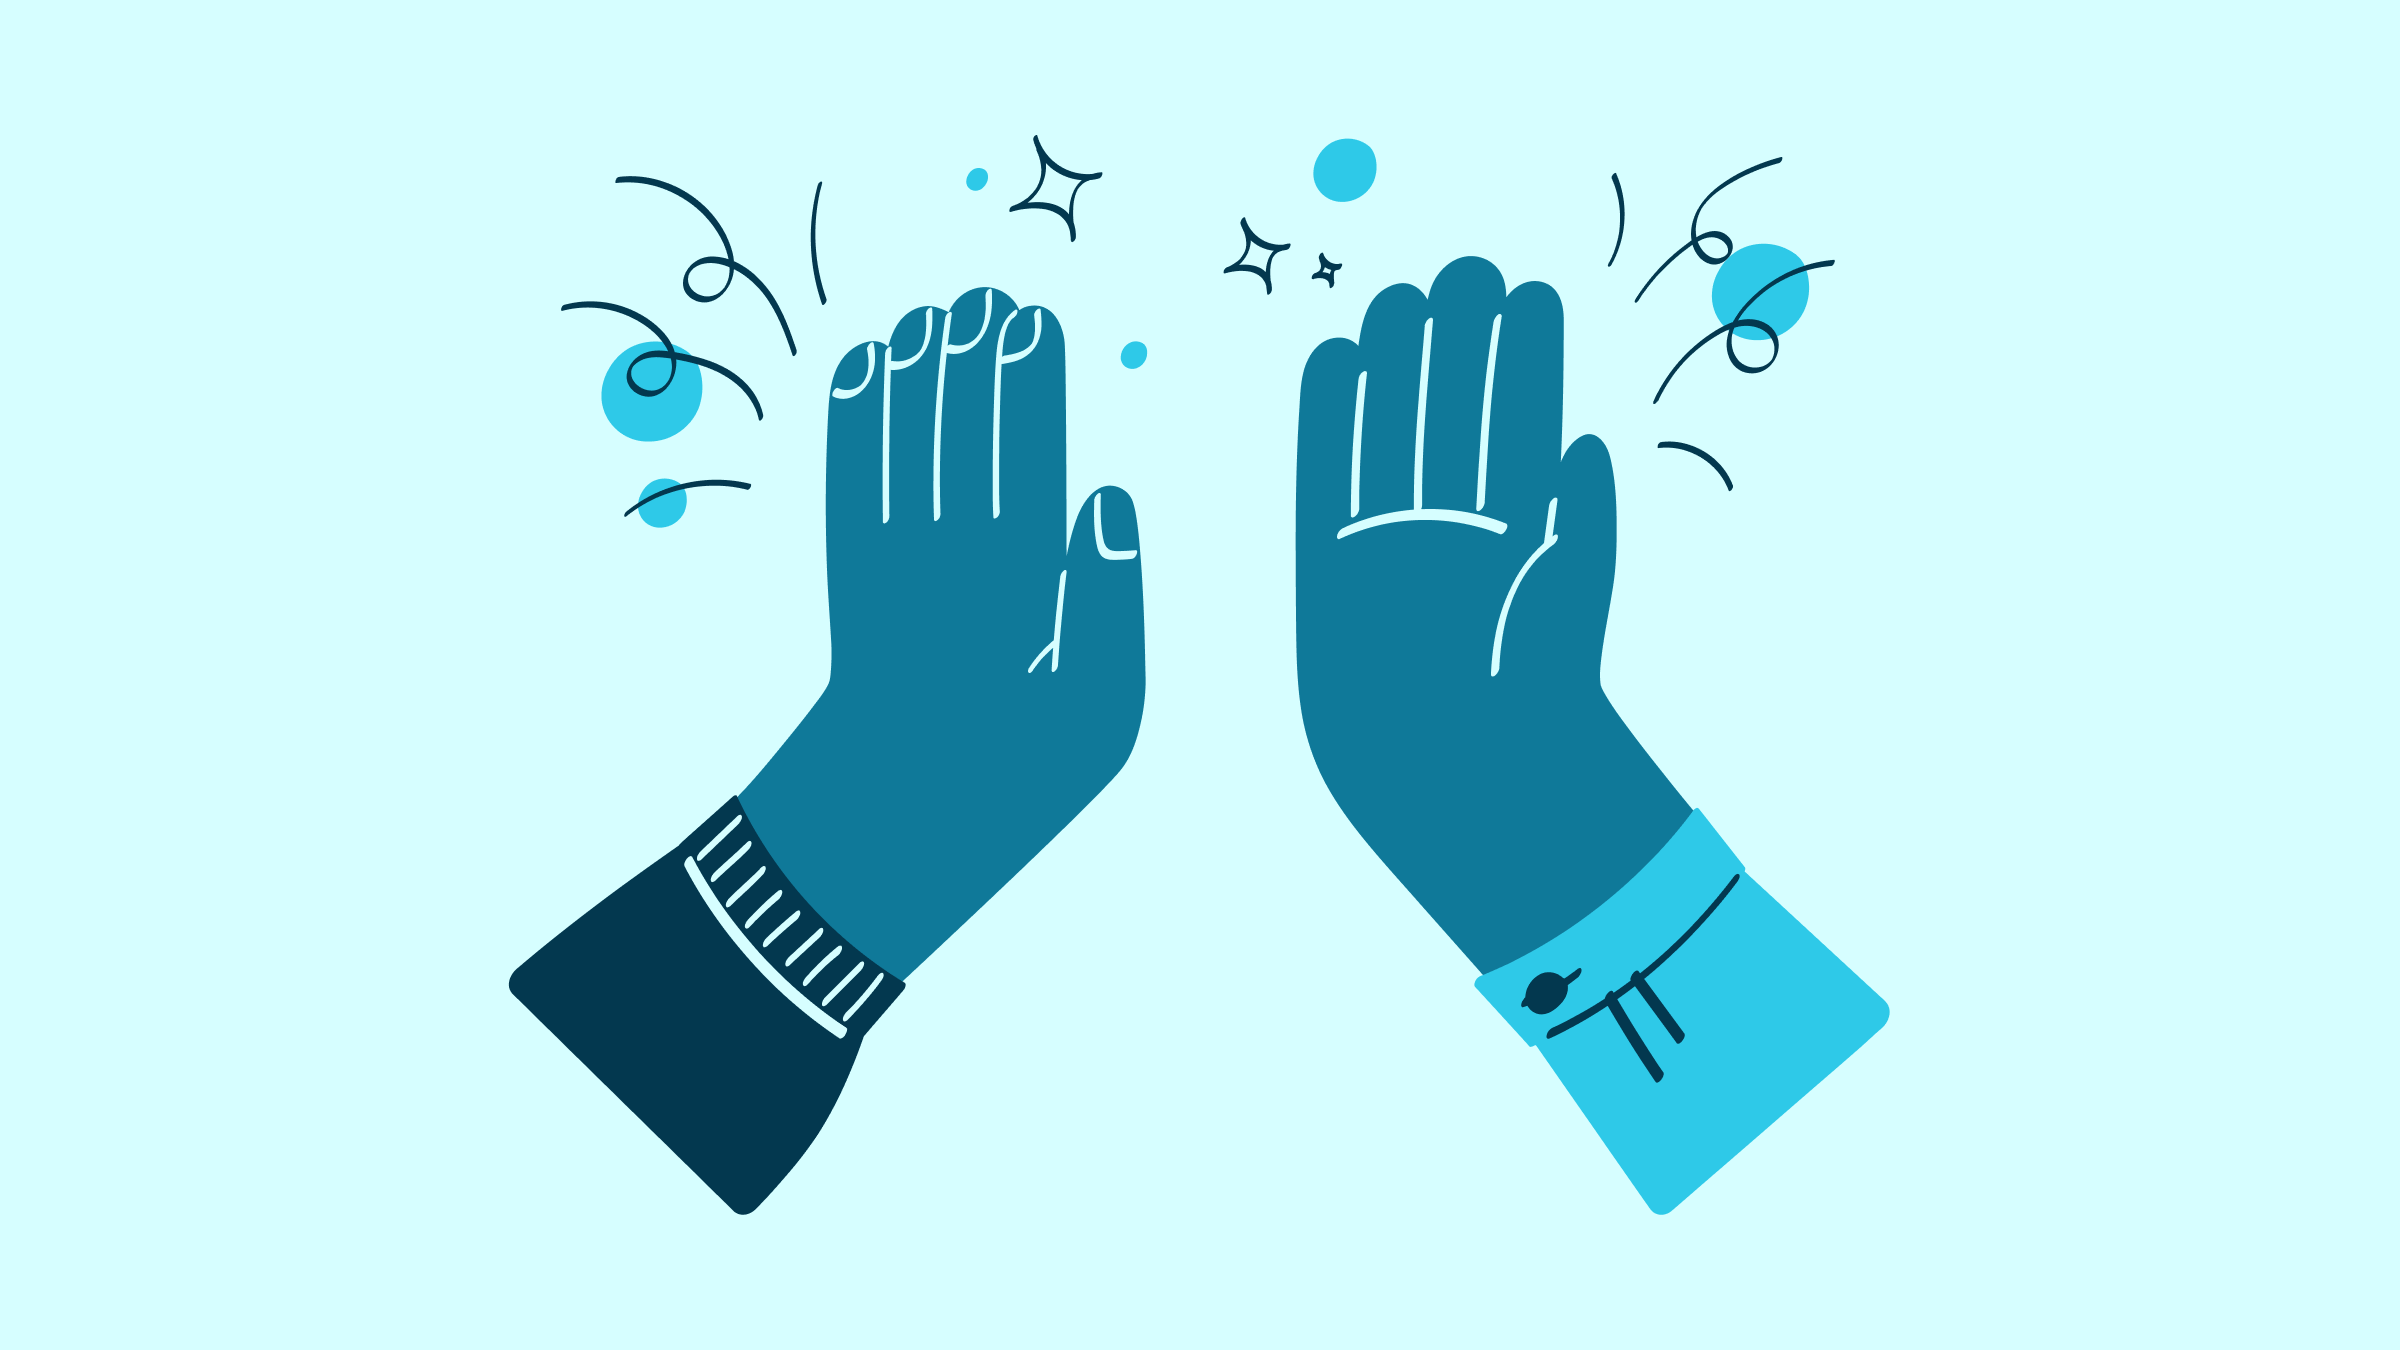 A teal drawing of two hands high-fiving.